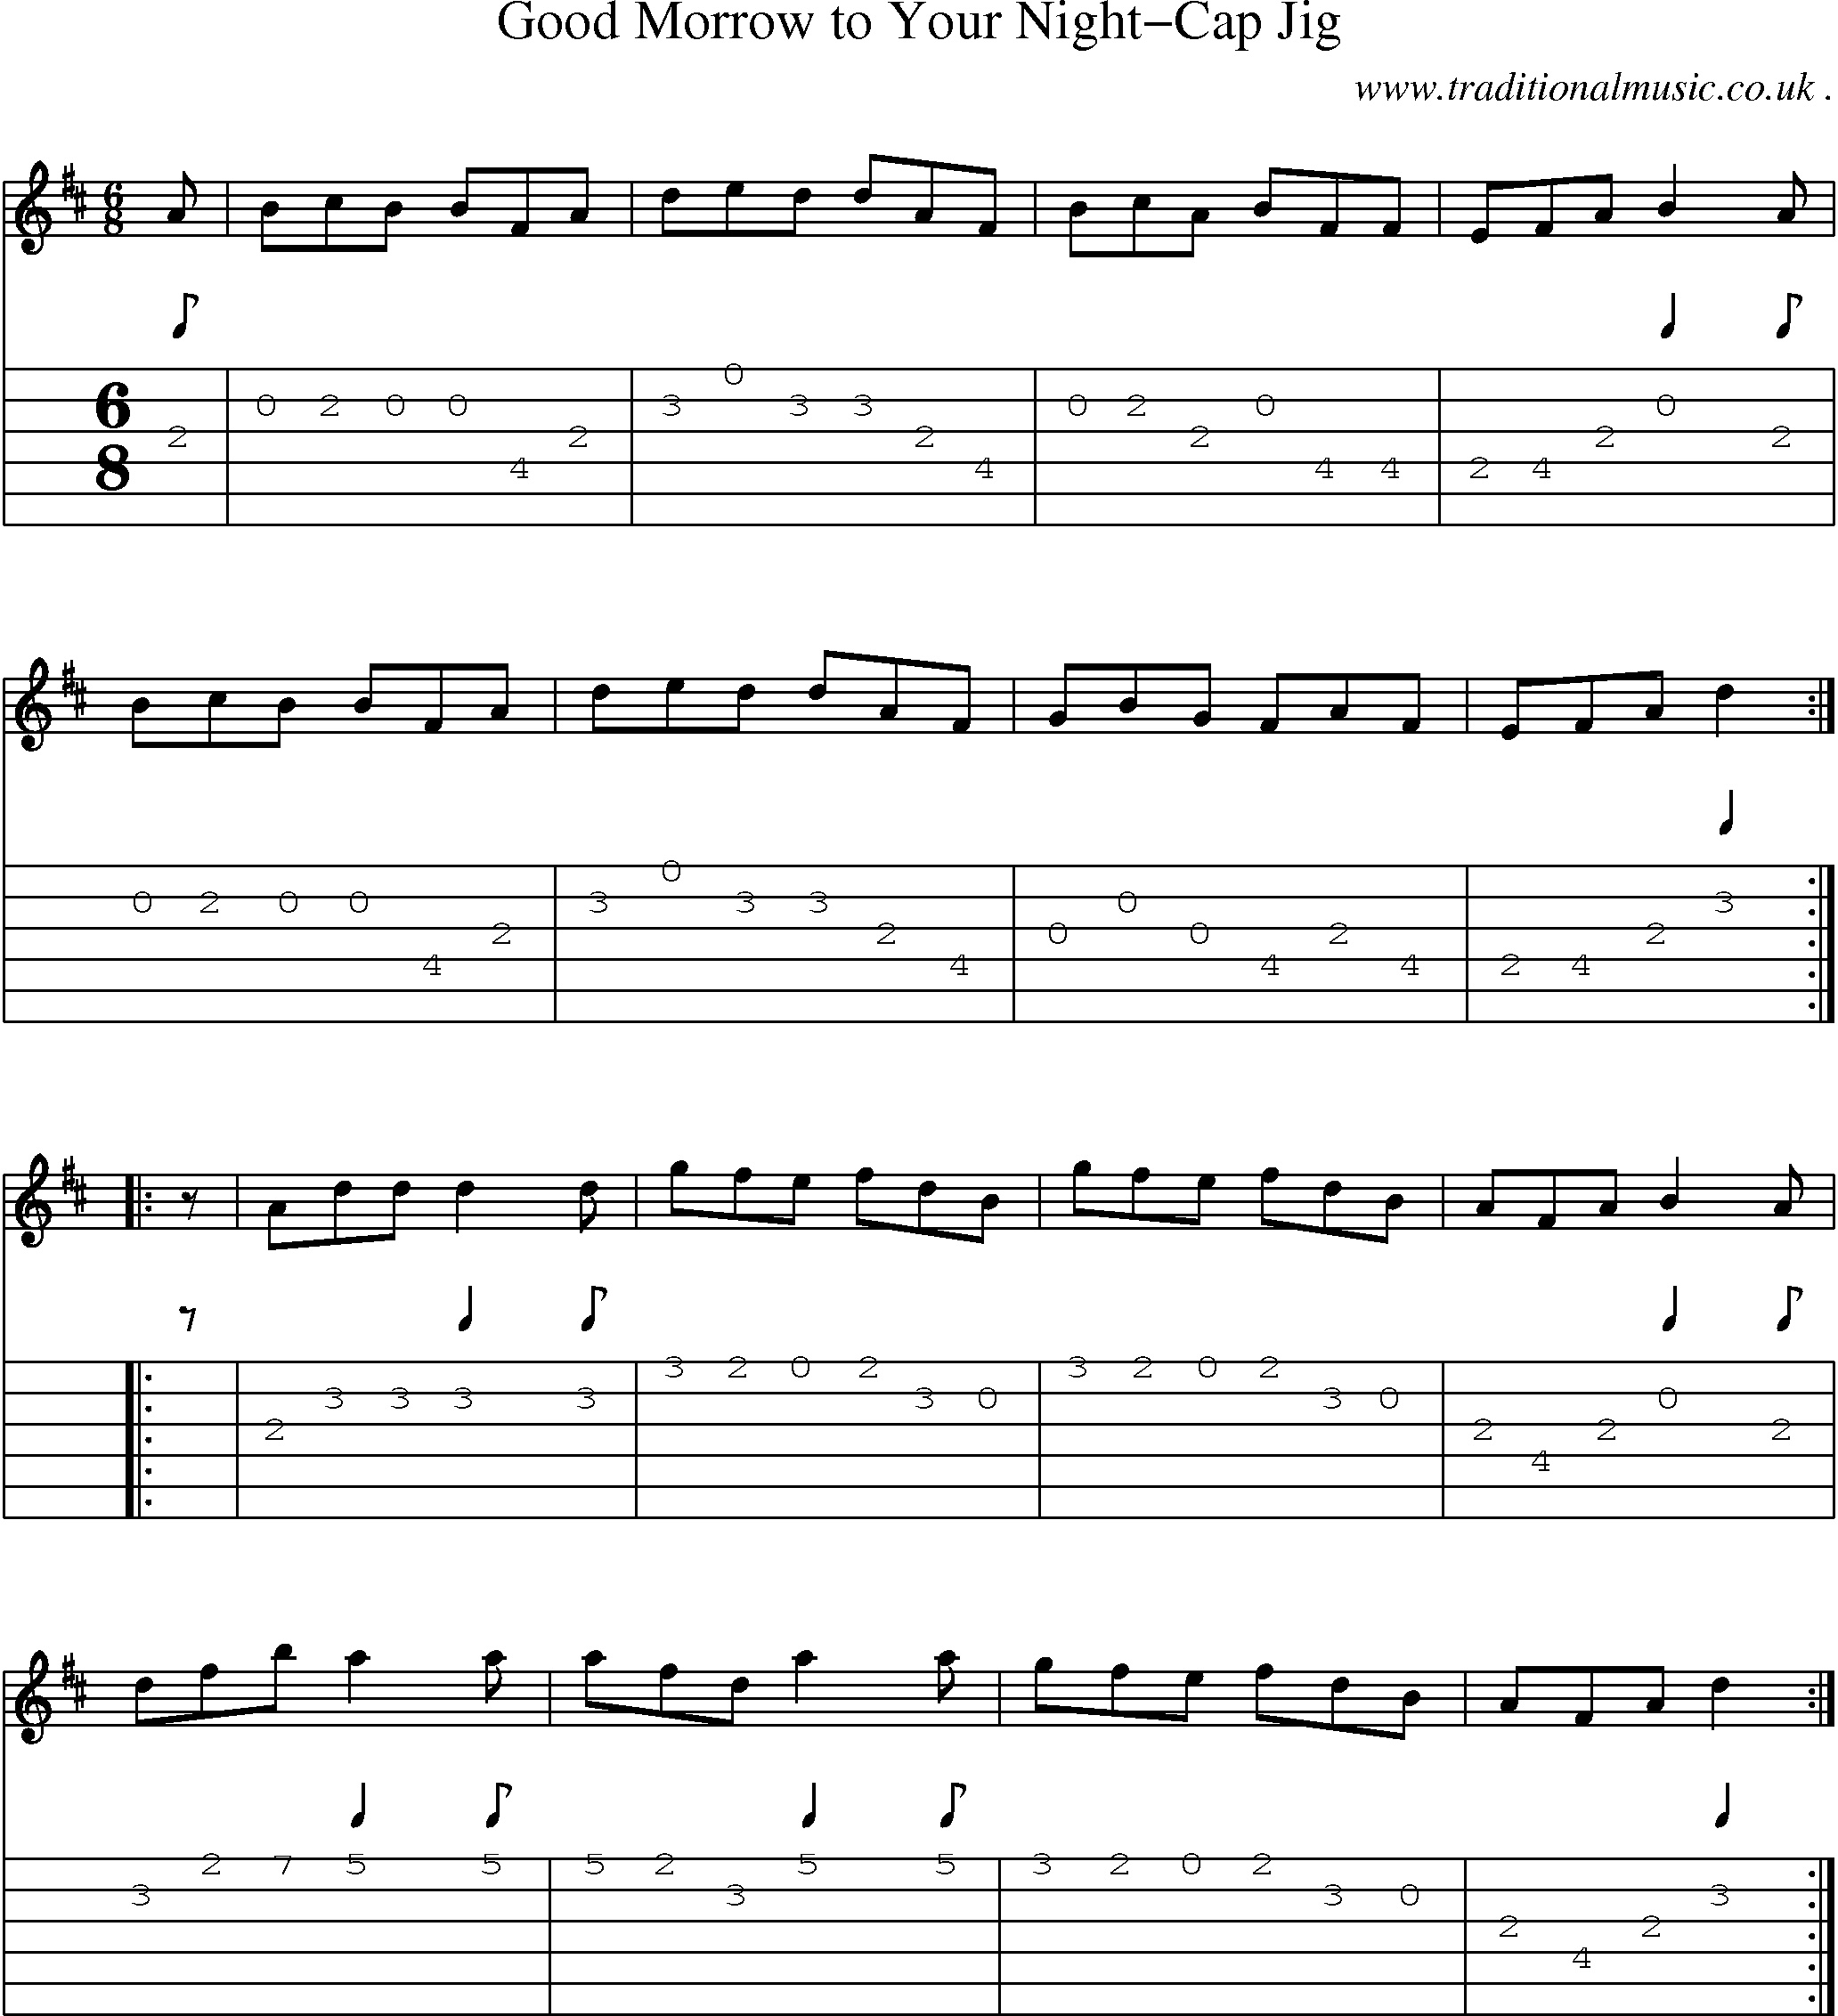 Sheet-Music and Guitar Tabs for Good Morrow To Your Night-cap Jig